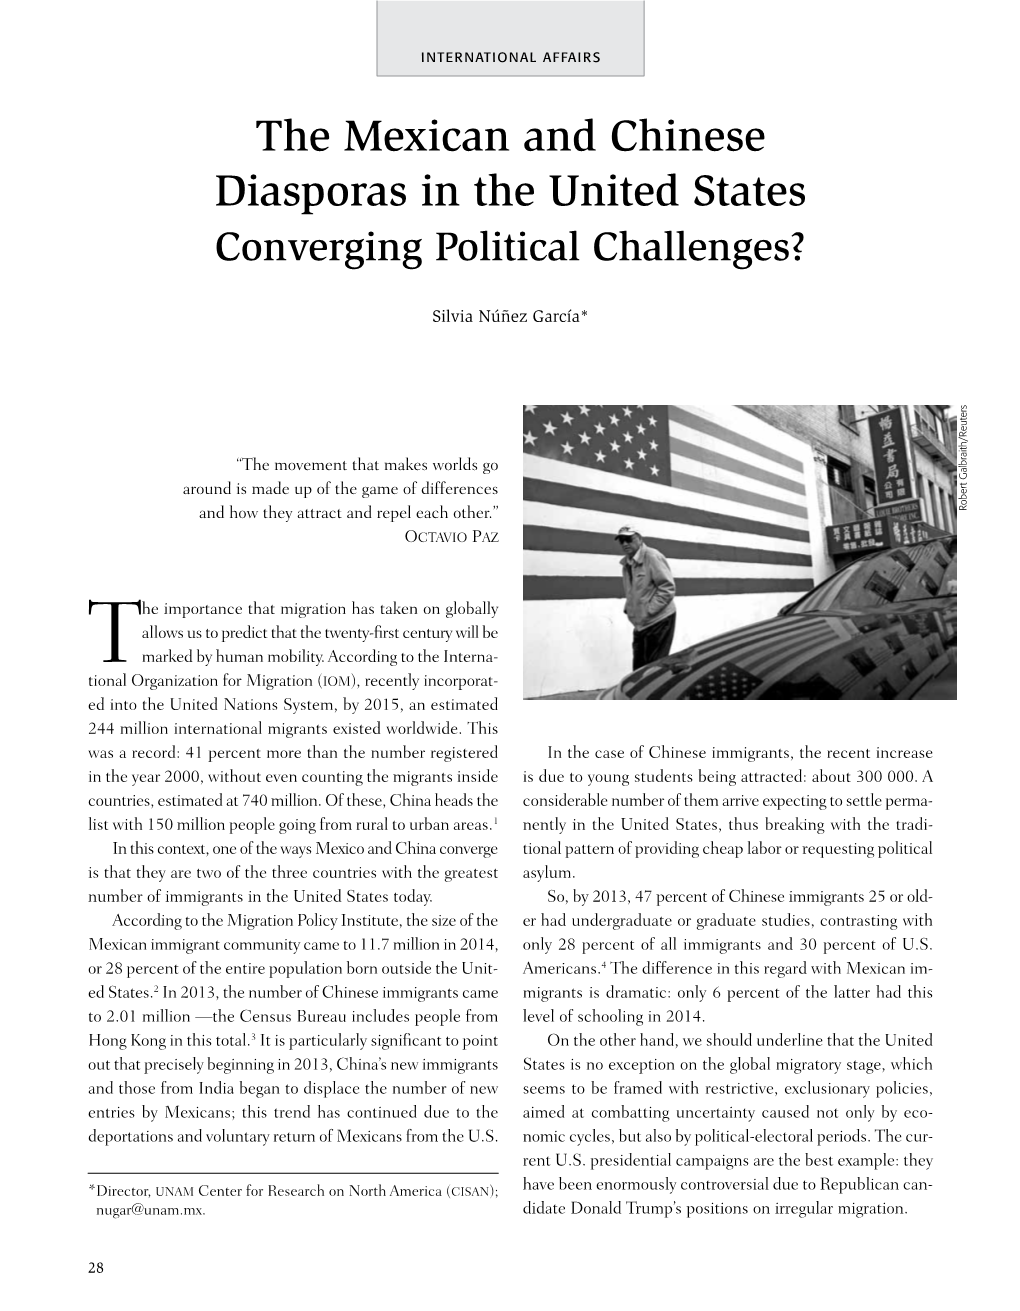 The Mexican and Chinese Diasporas in the United States Converging Political Challenges?